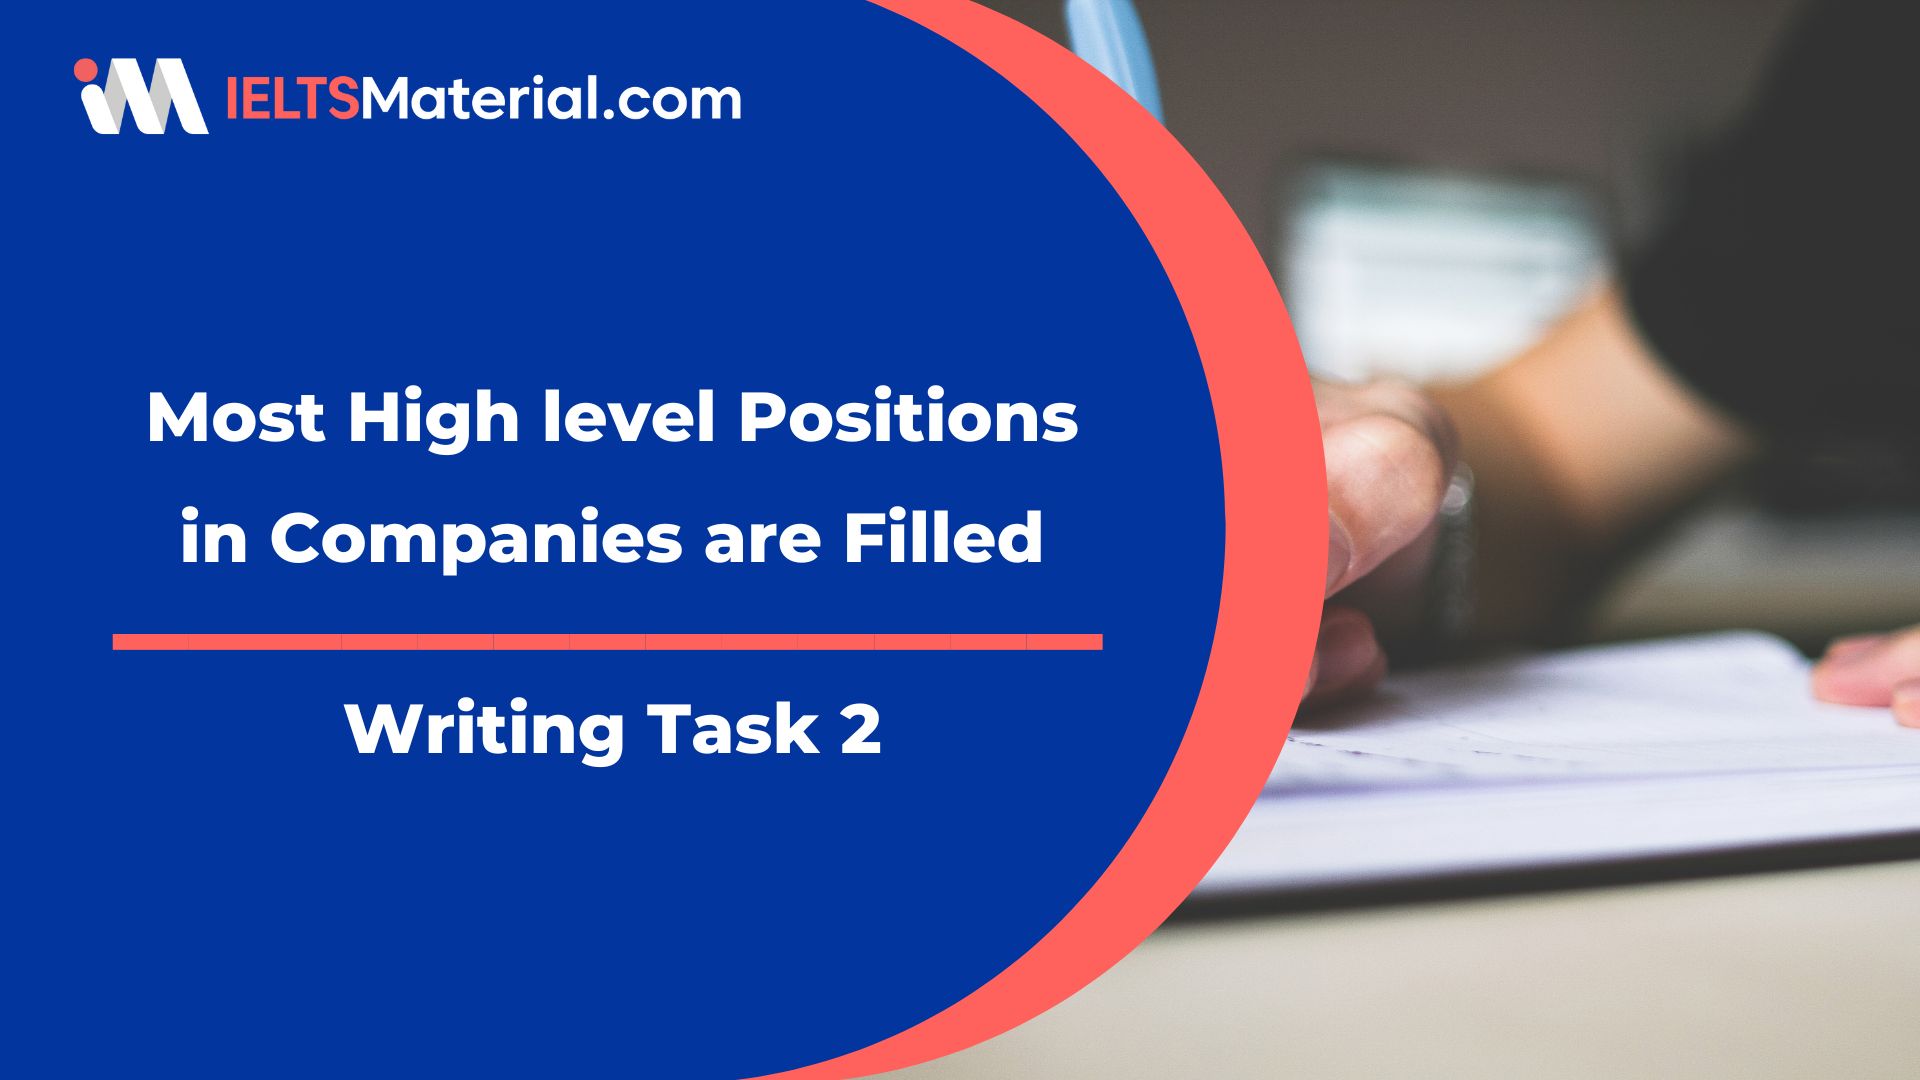 Writing Task 2: Most High level Positions in Companies are Filled